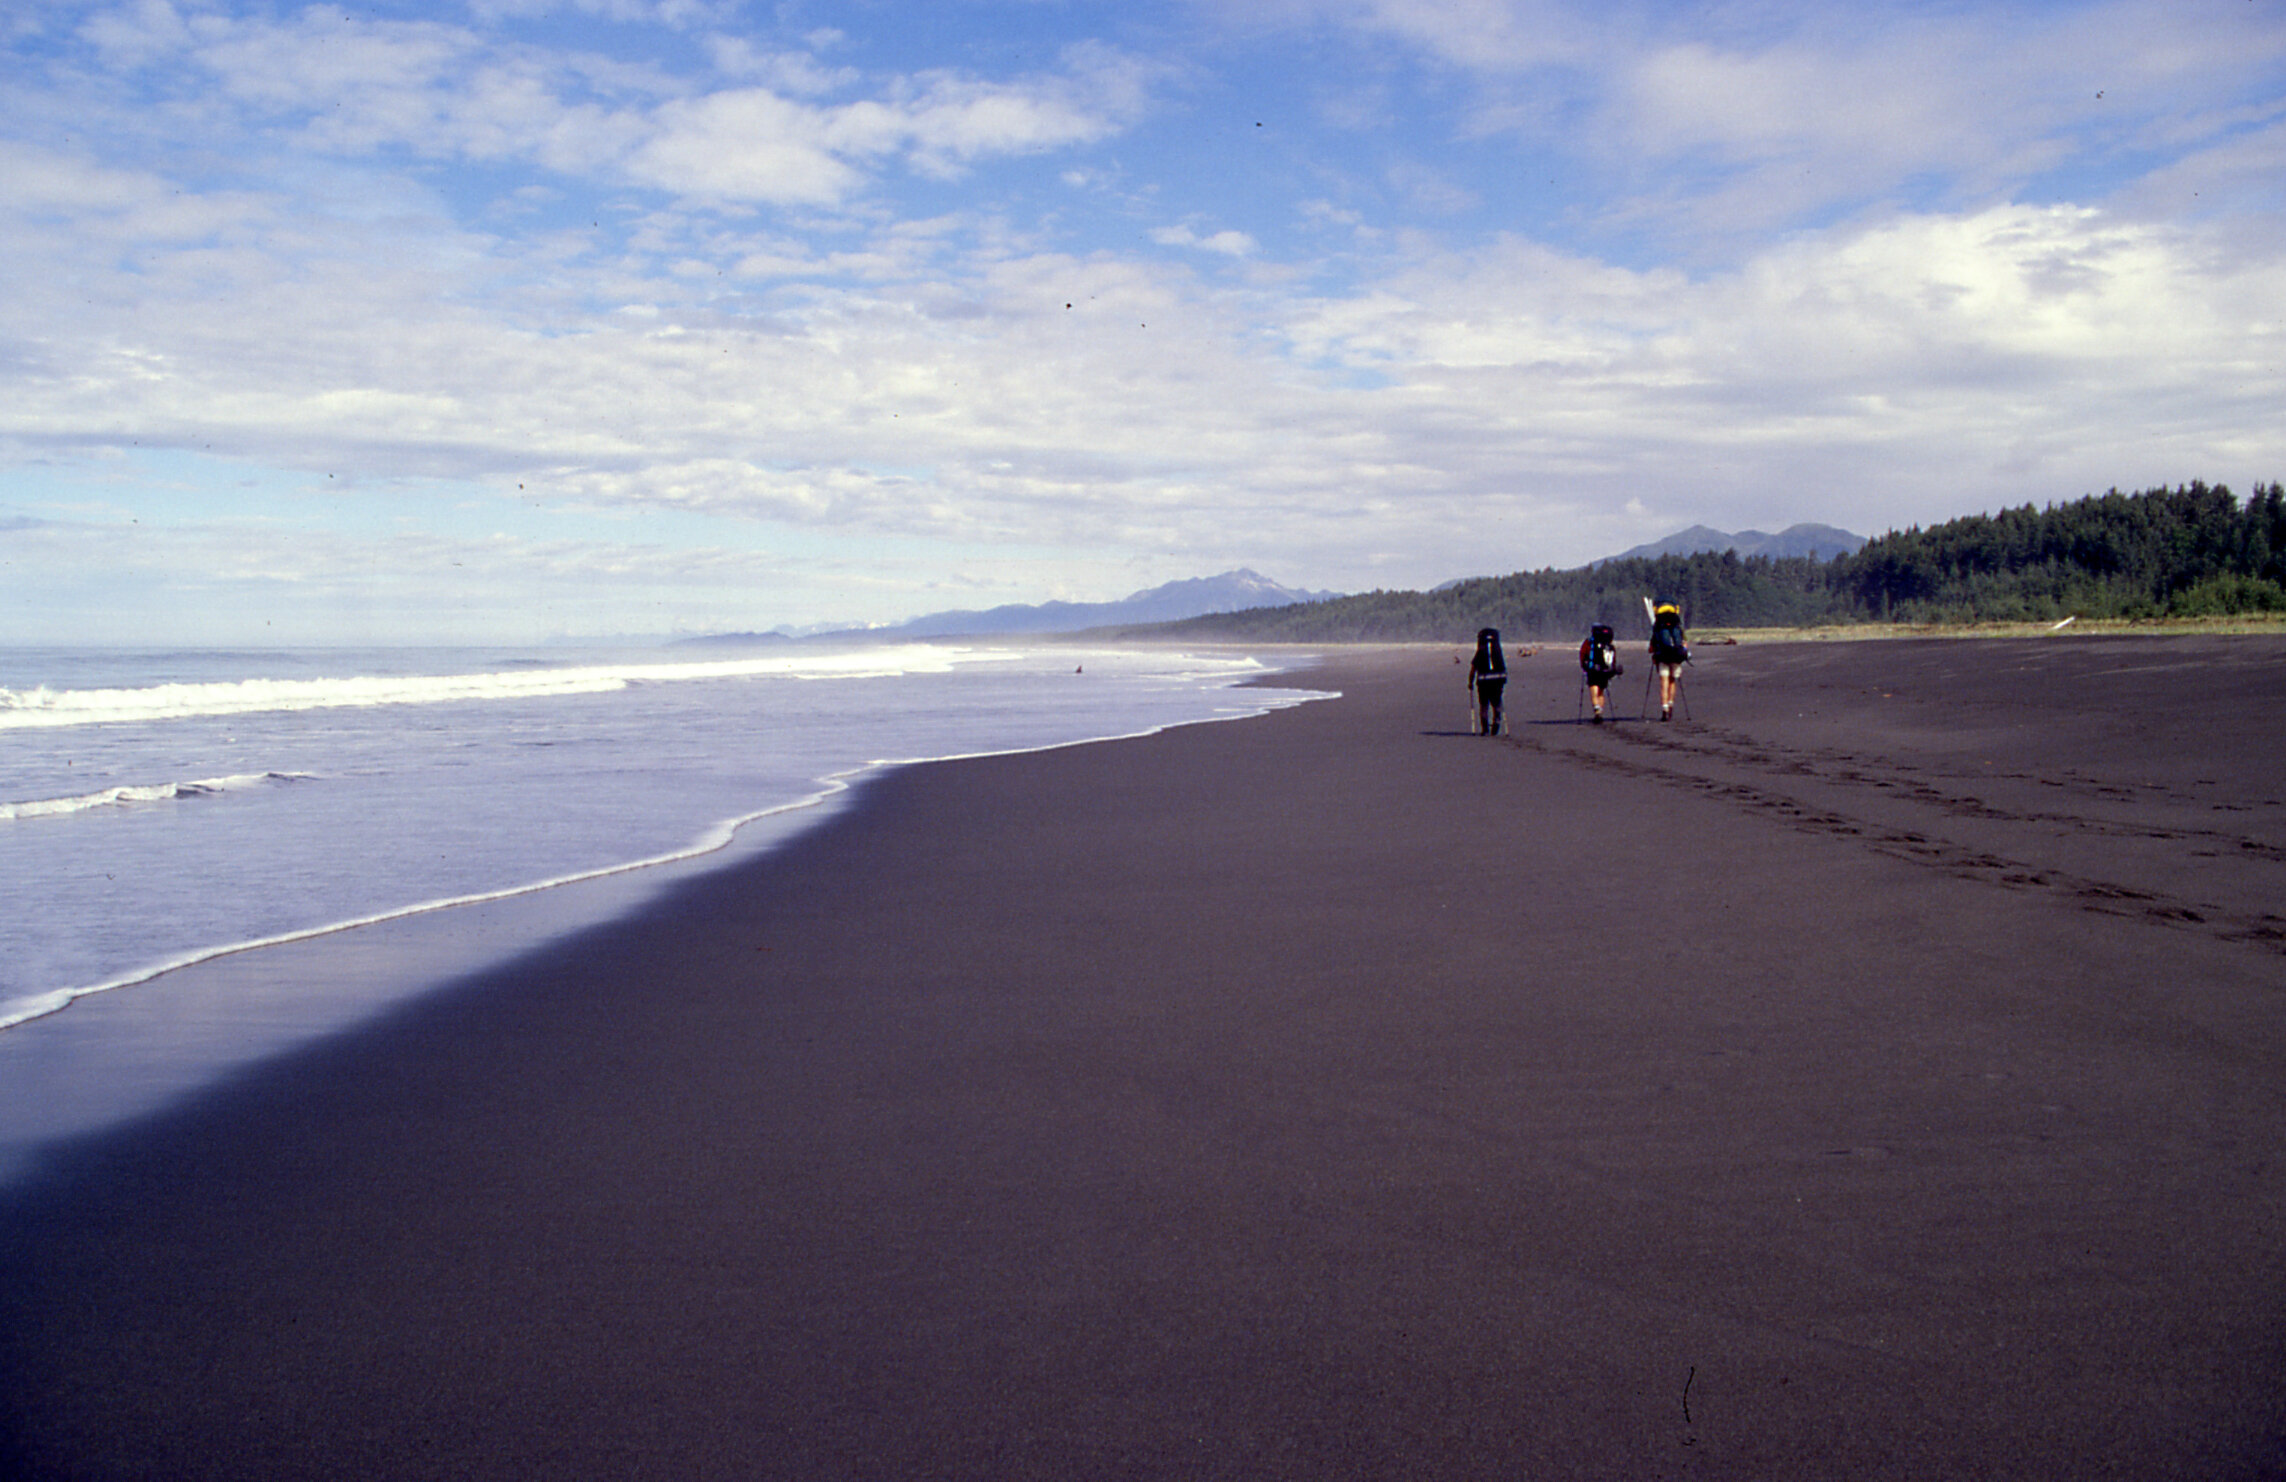  Frequently while walking along the beach like this we could tell when our next major river crossing would be not by seeing the river itself up ahead, but by seeing the massive muddy breakers off-shore created by the outflow of water into the surf.  